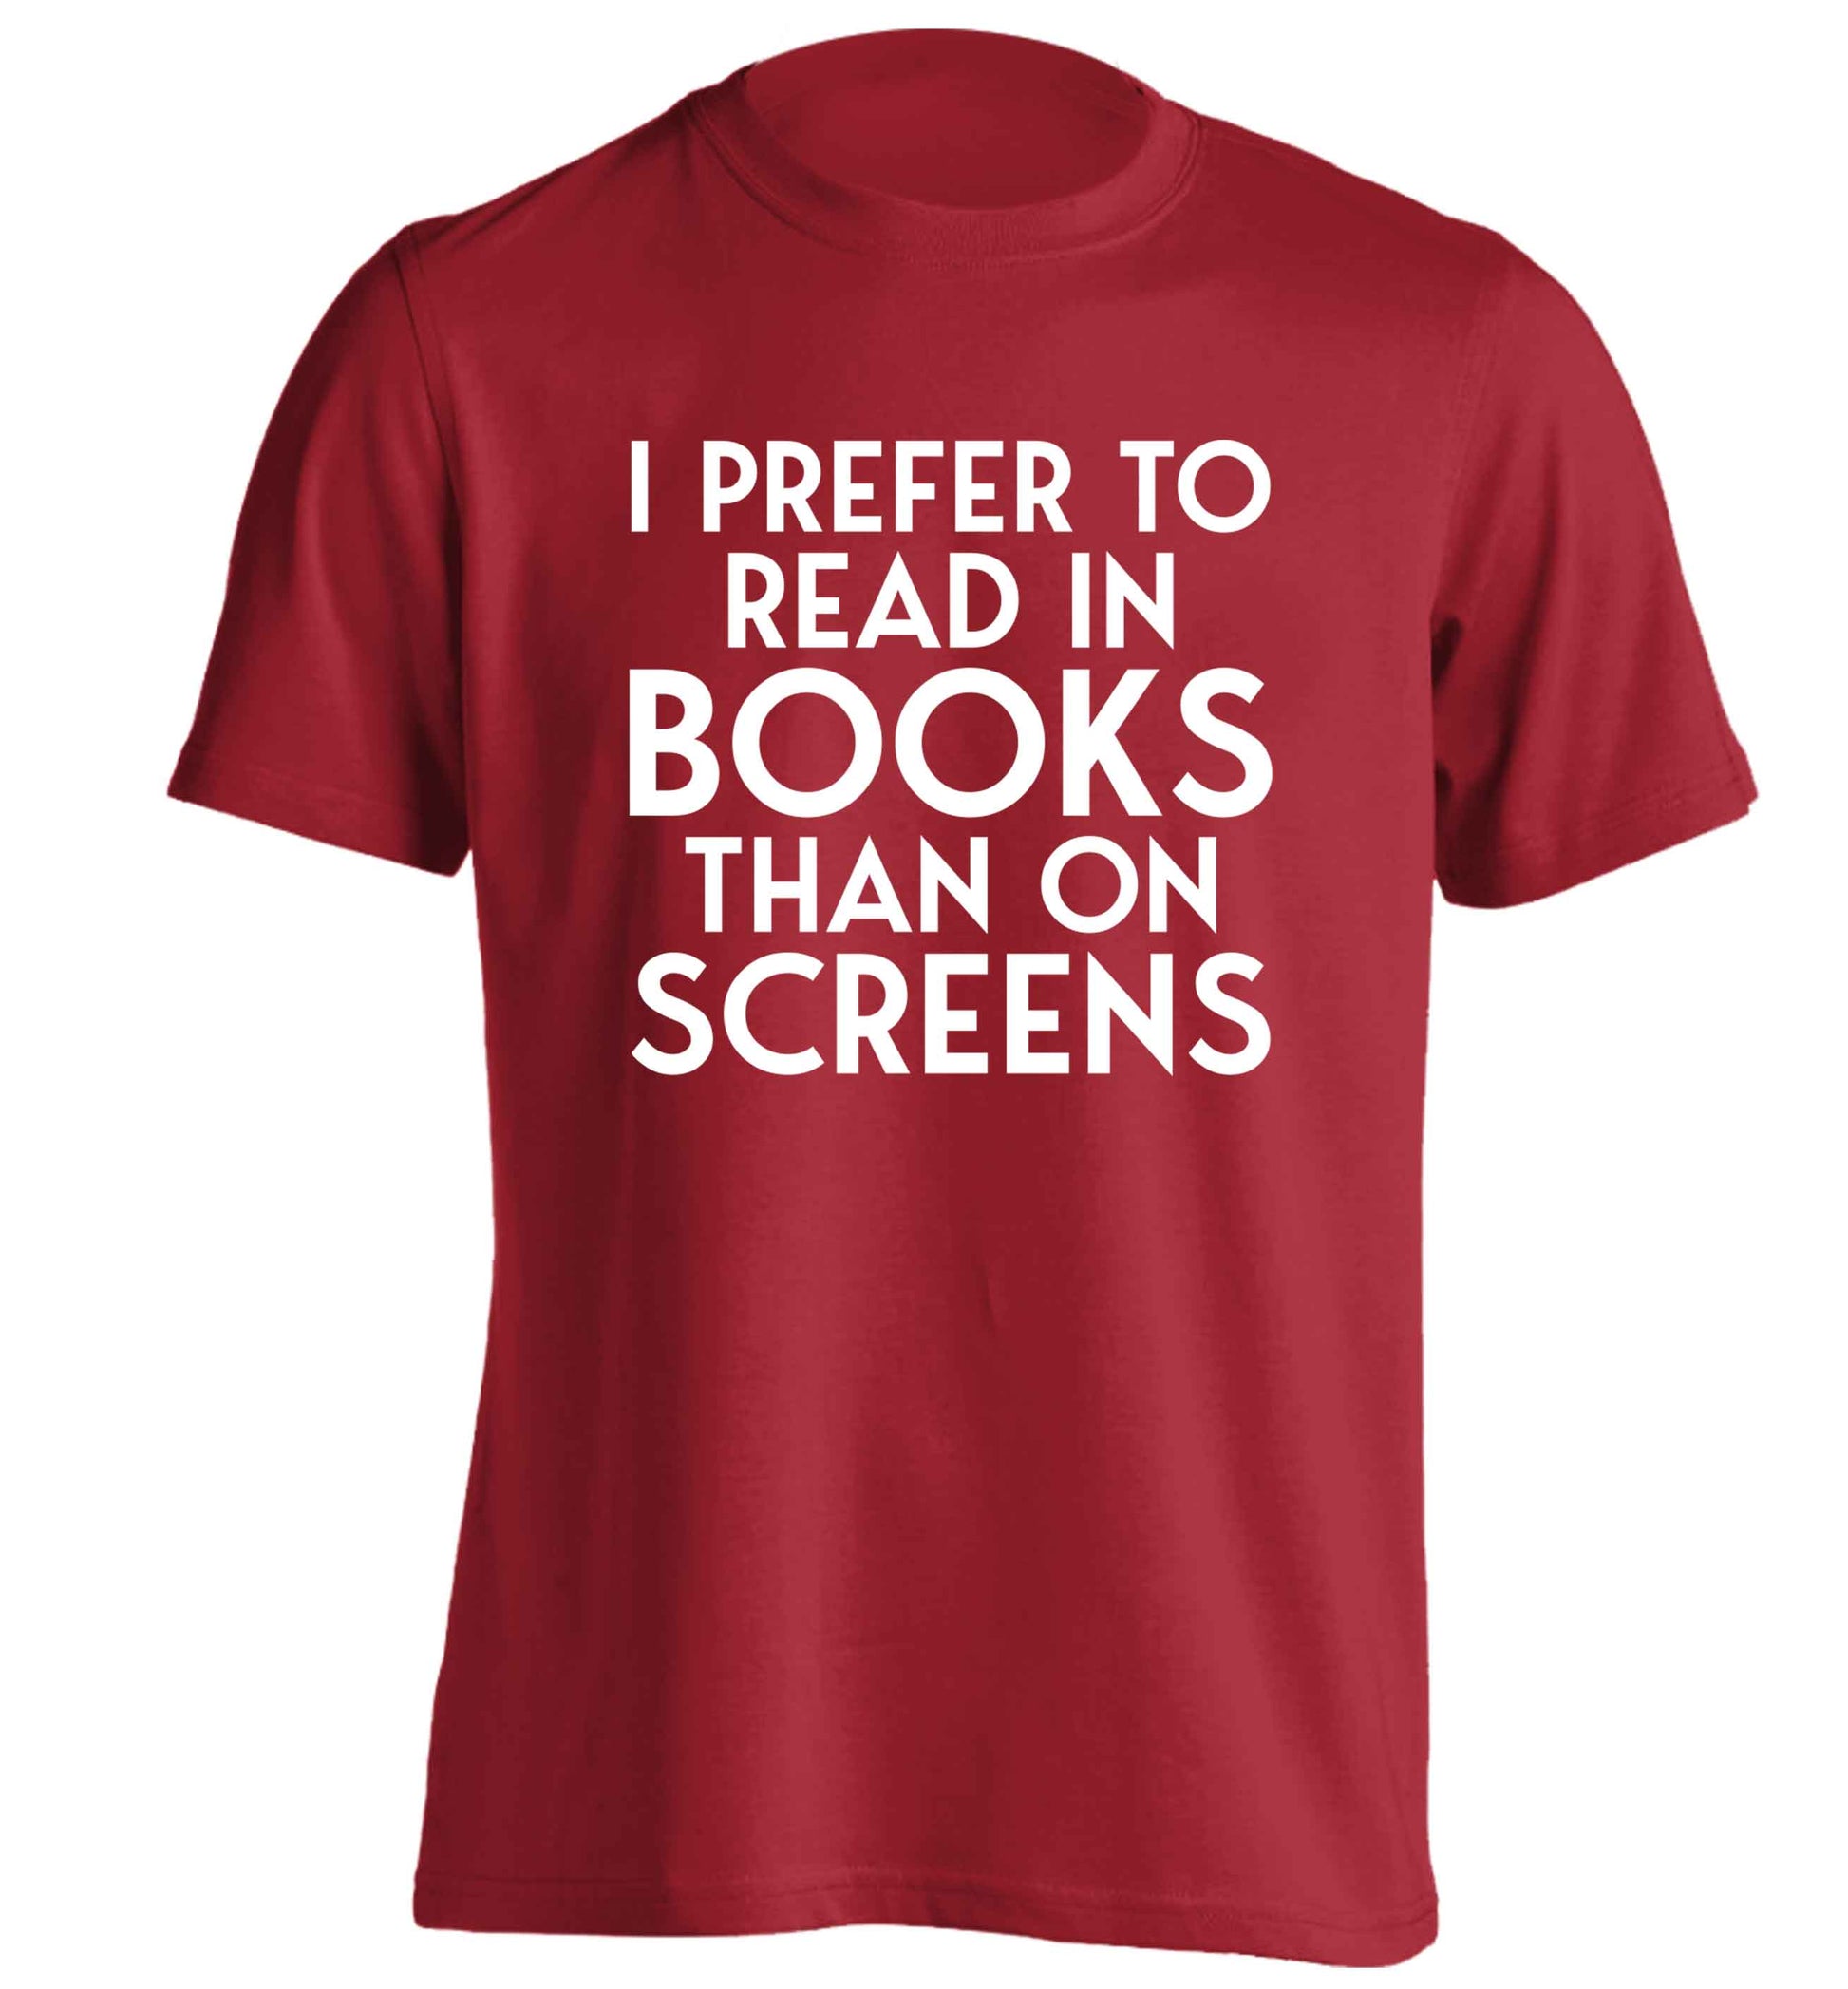 I prefer to read in books than on screens adults unisex red Tshirt 2XL